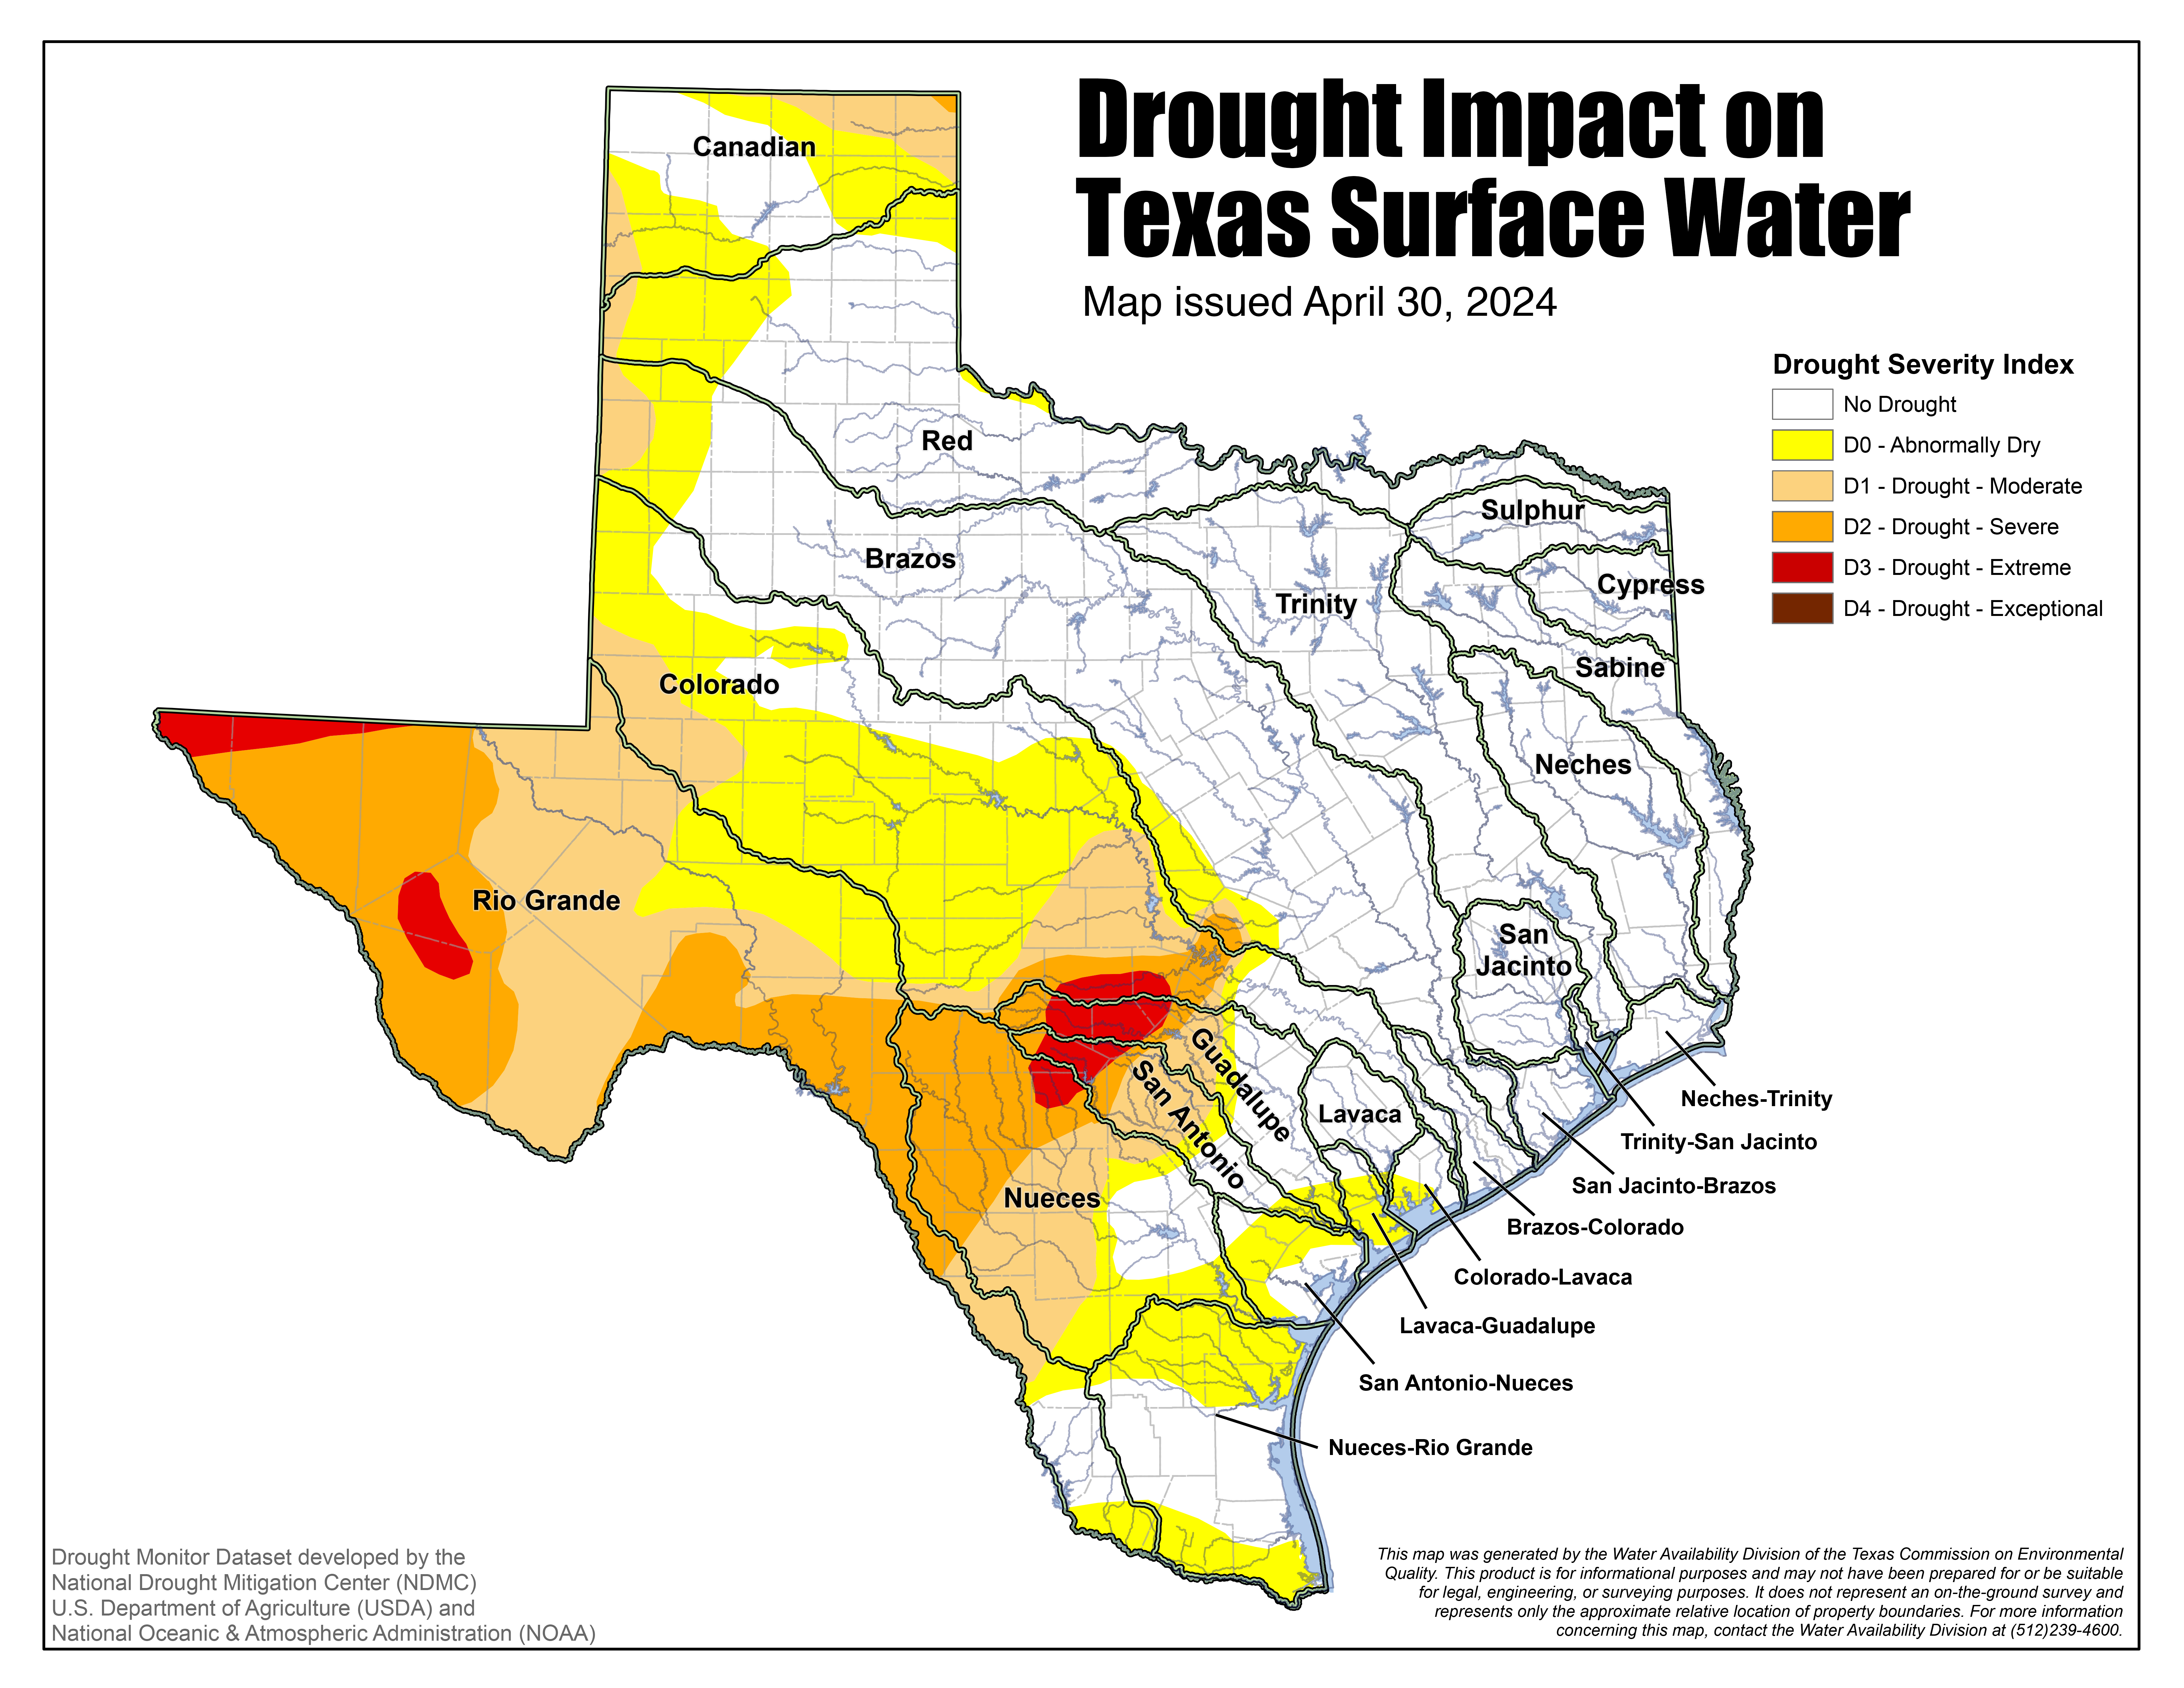 Map of Drought Impact on Texas Surface Water from TCEQ